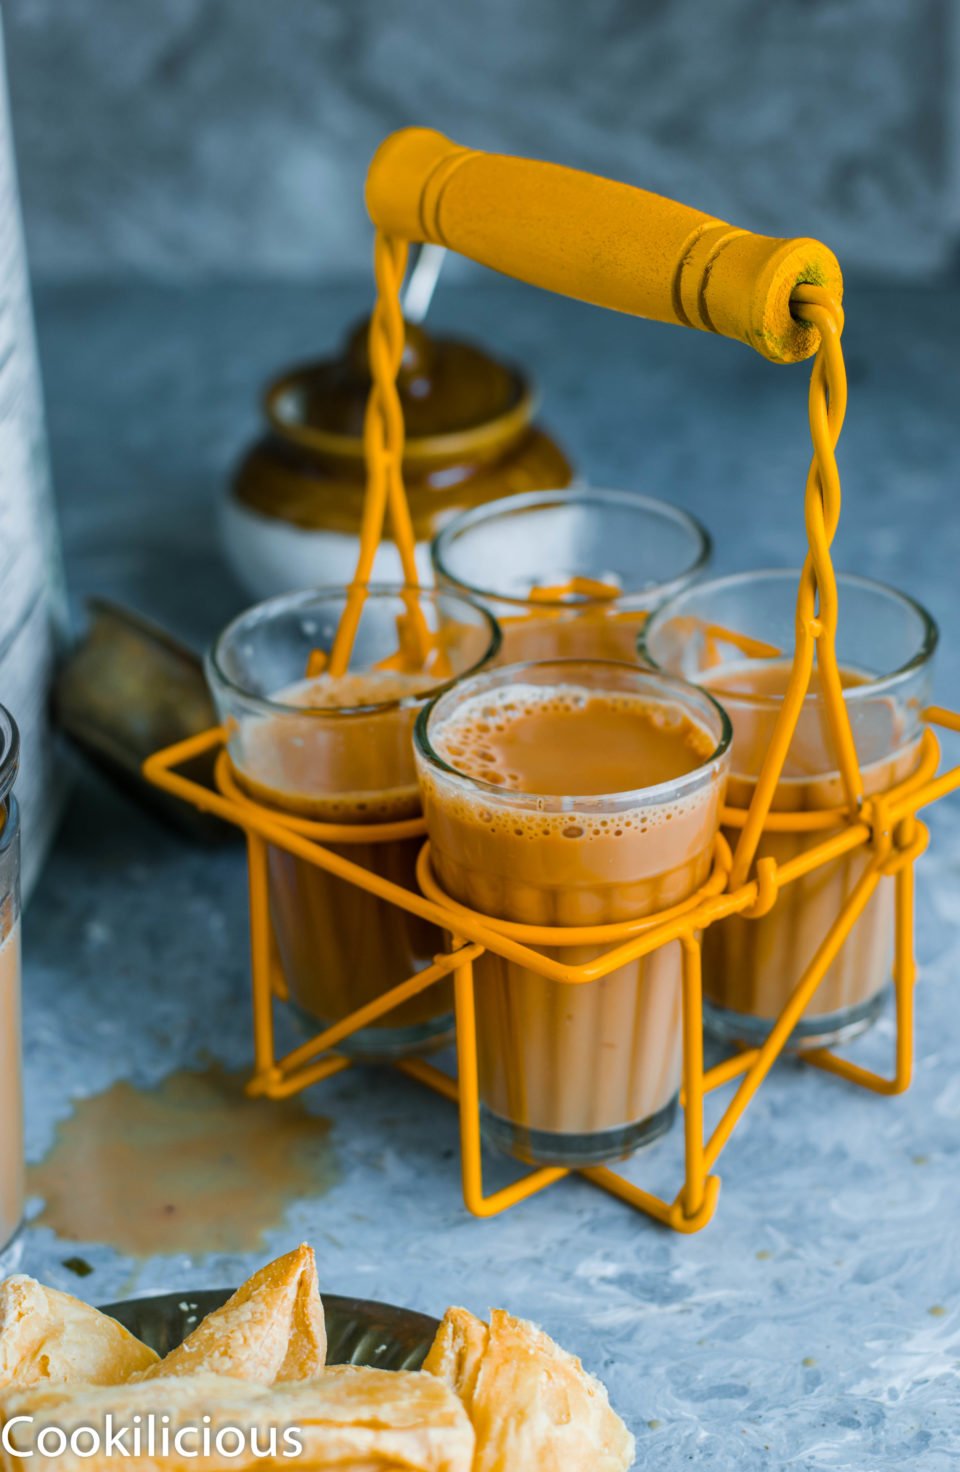 4 cups of masala chai resting in a chai stand